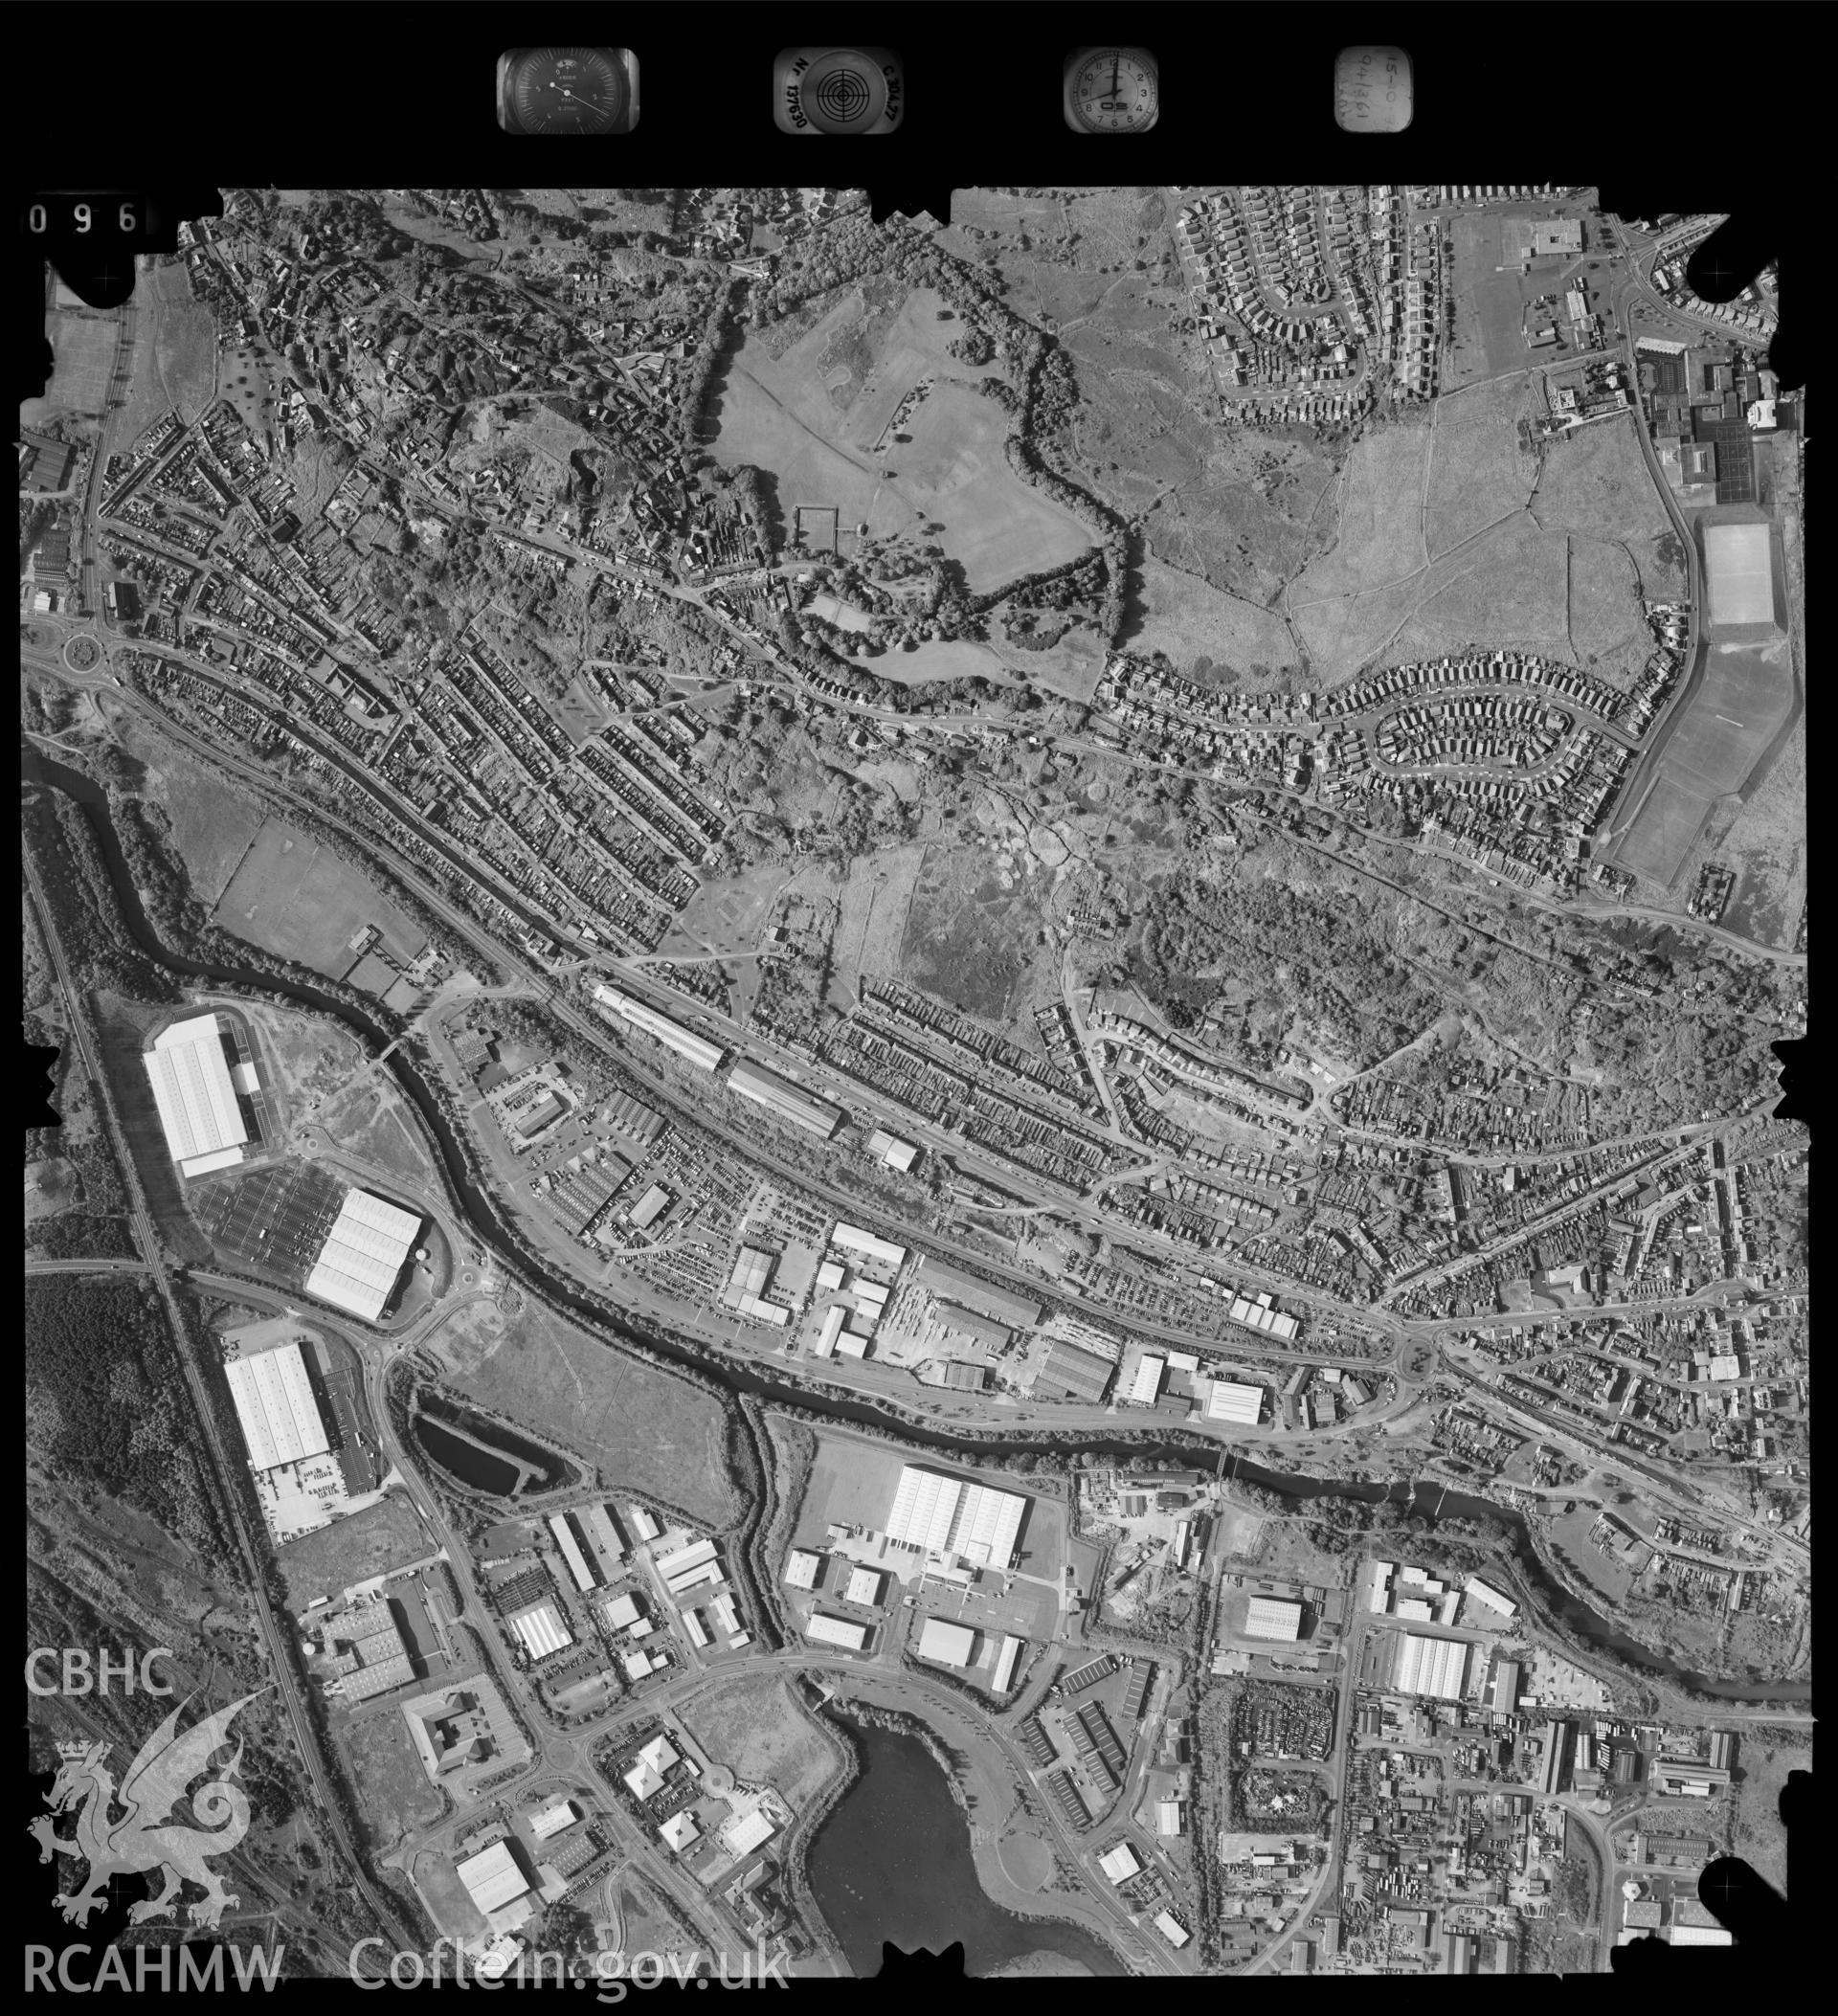 Digitized copy of an aerial photograph showing the Winsh-wen area f Swansea, taken by Ordnance Survey, 1994.